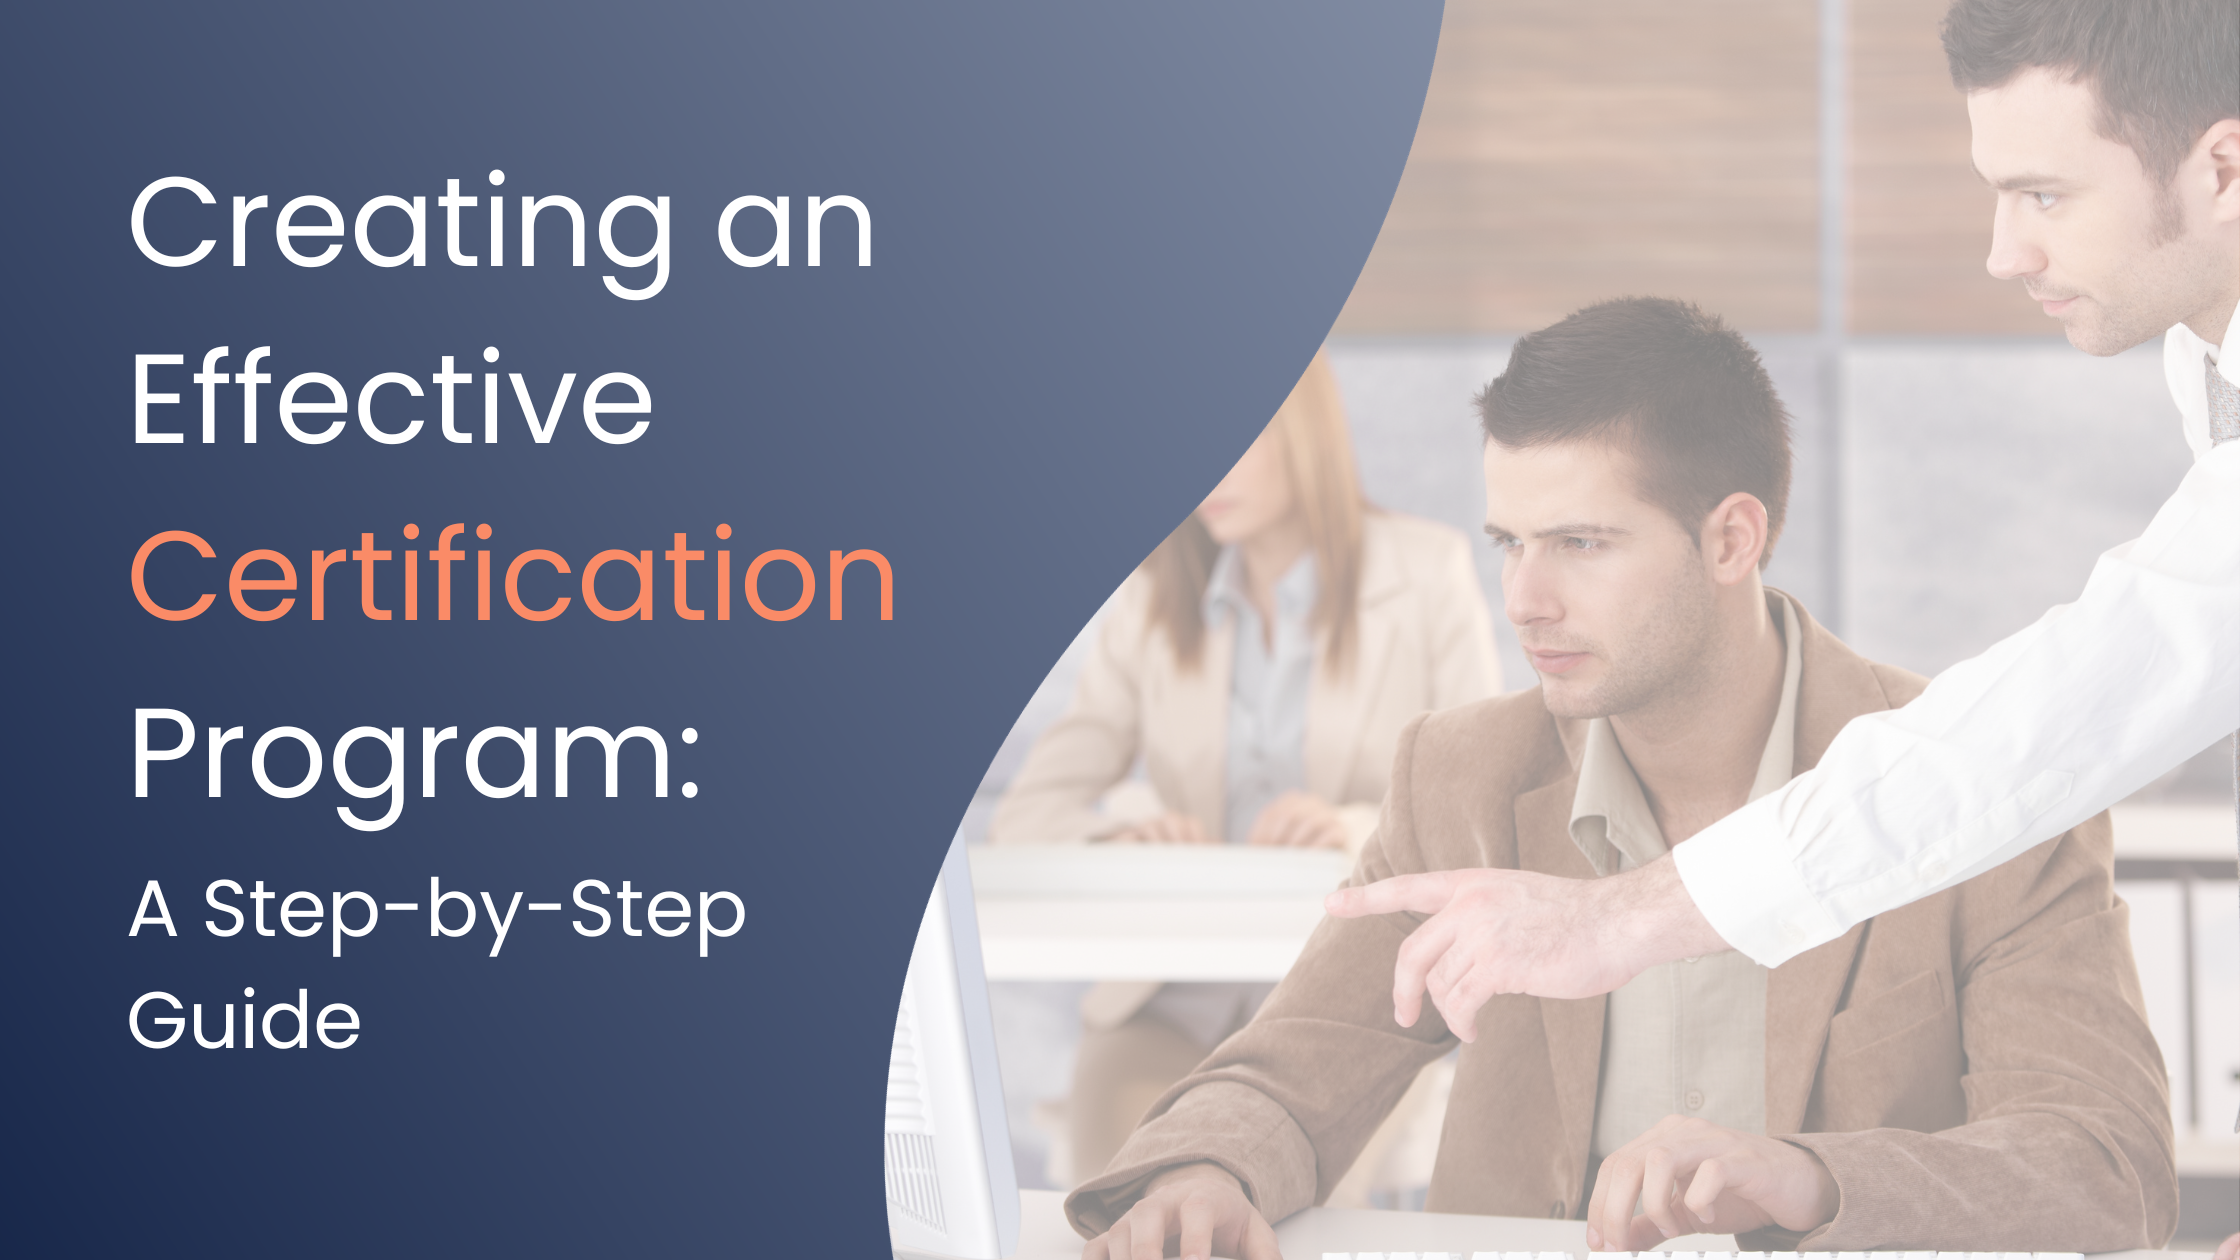 Creating an Effective Certification Program: Step-by-Step Guide